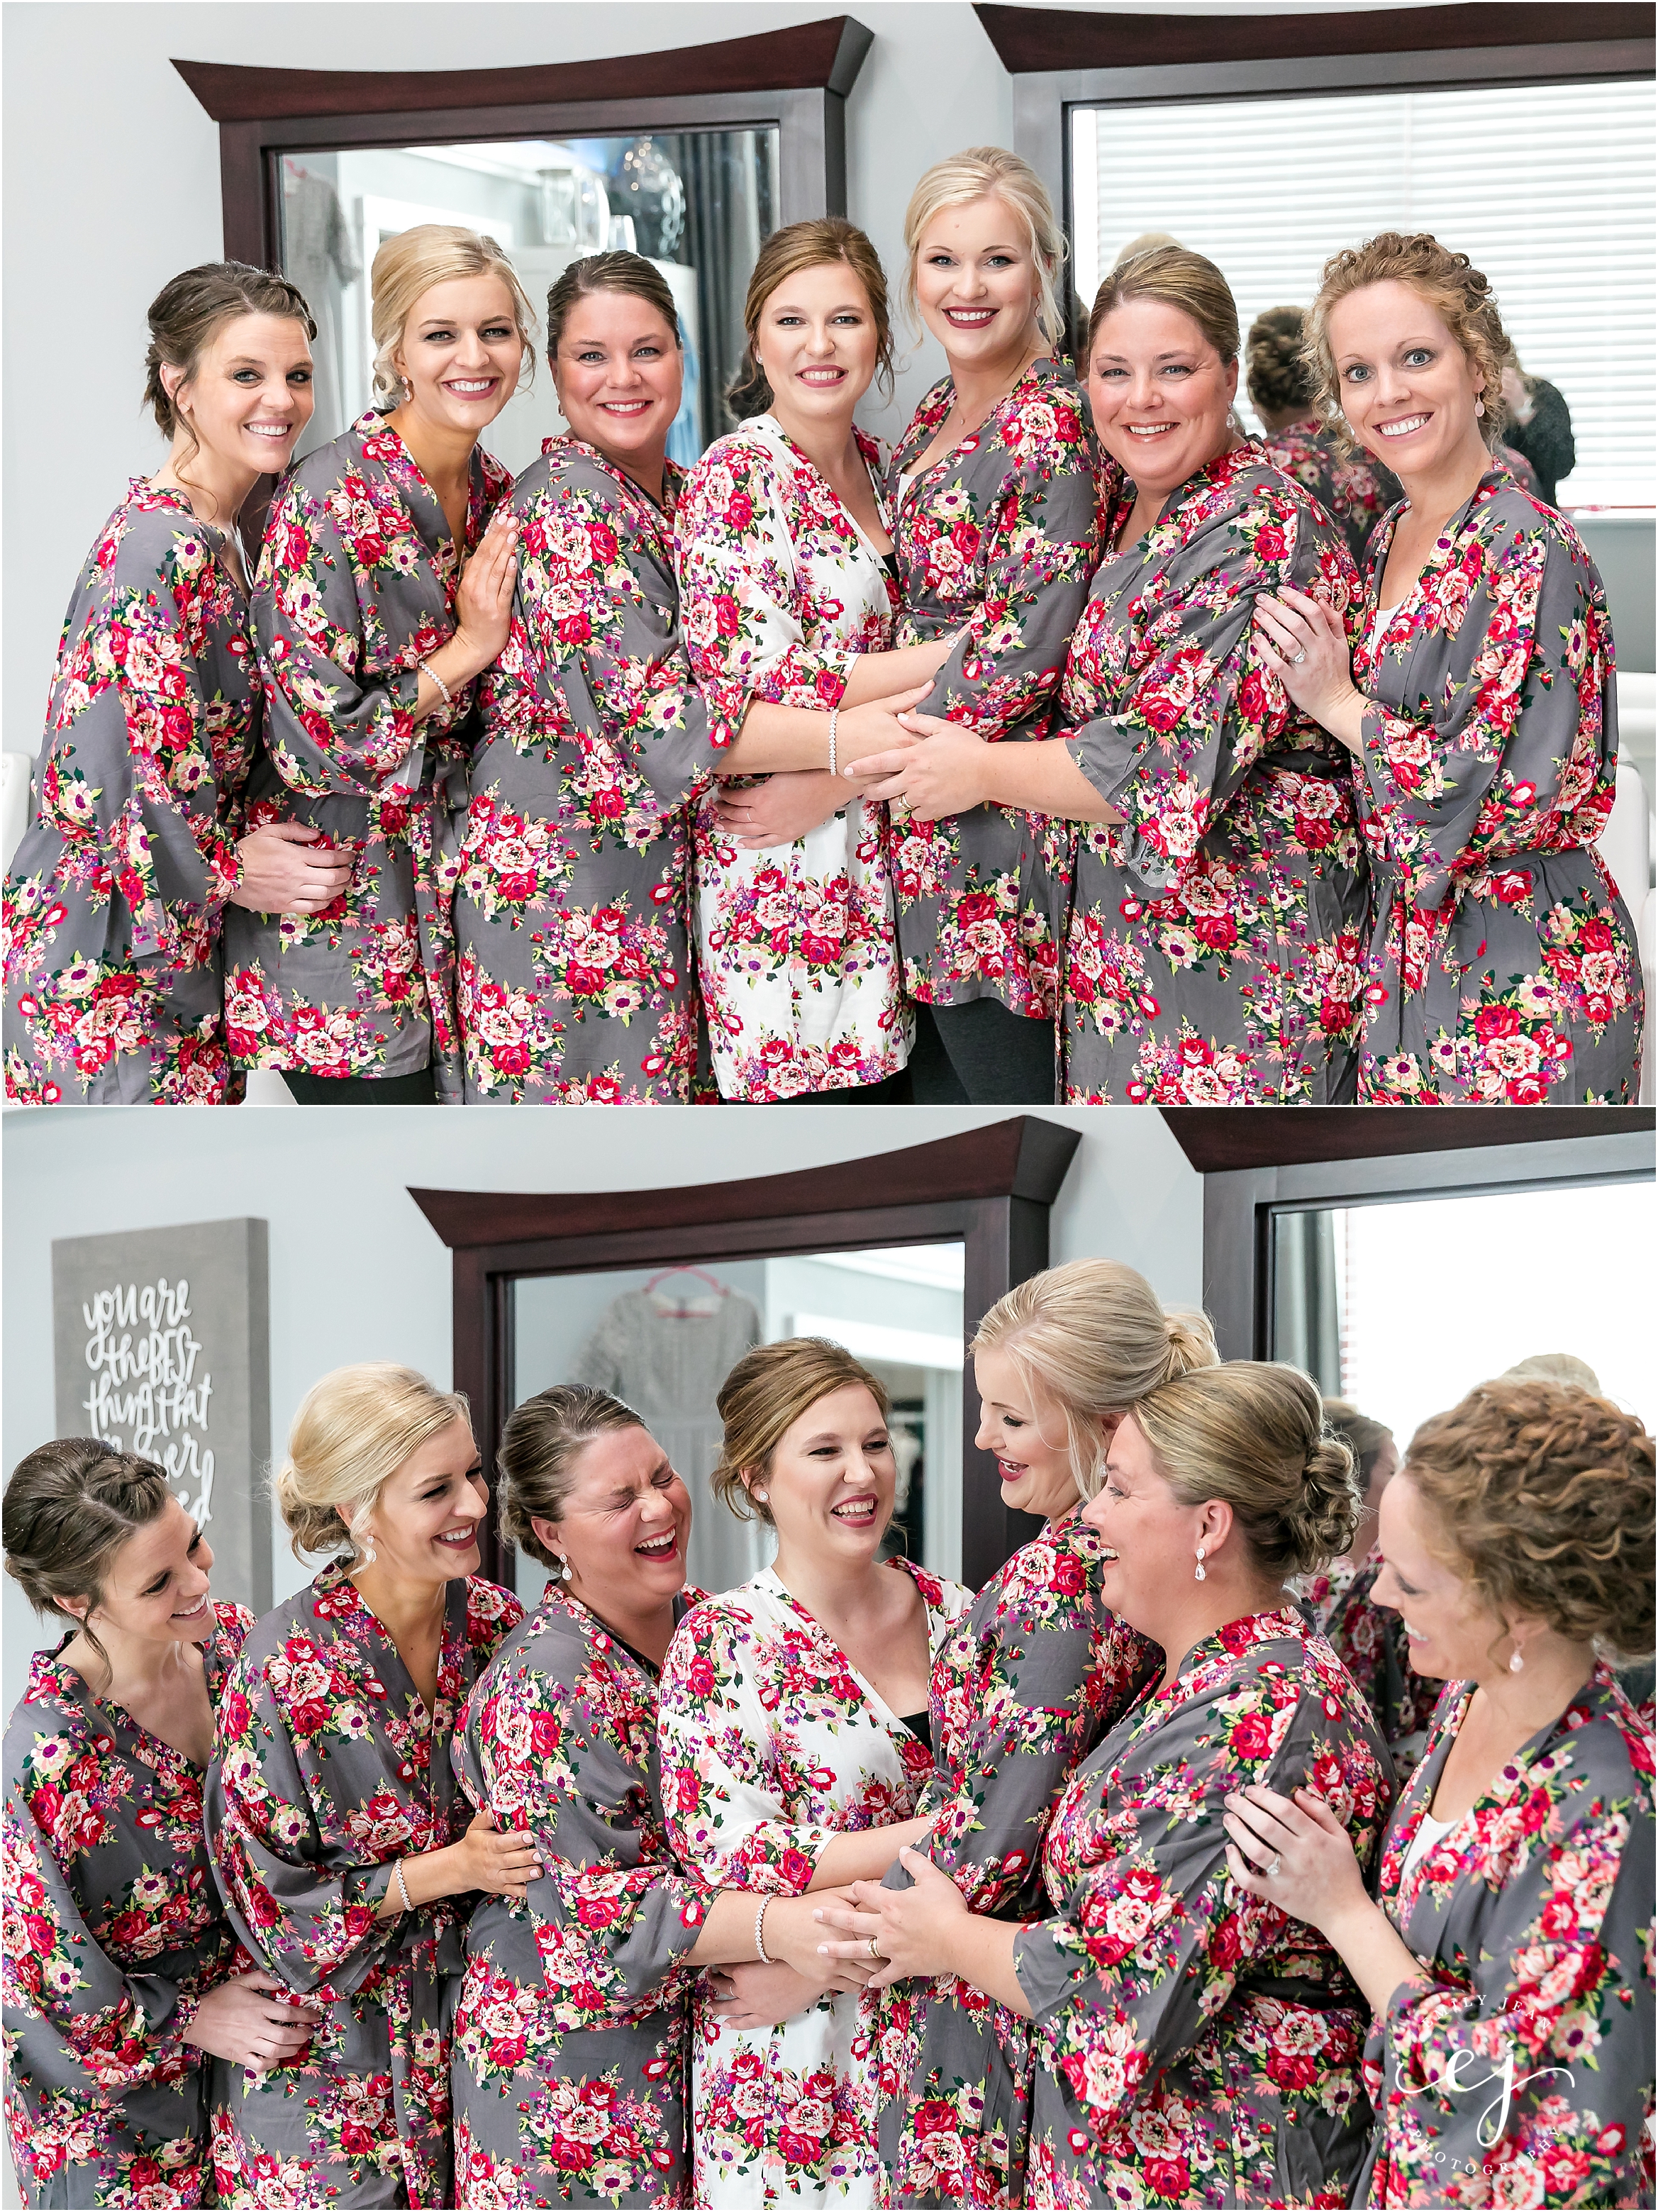 Bridesmaids wearing floral robes standing together